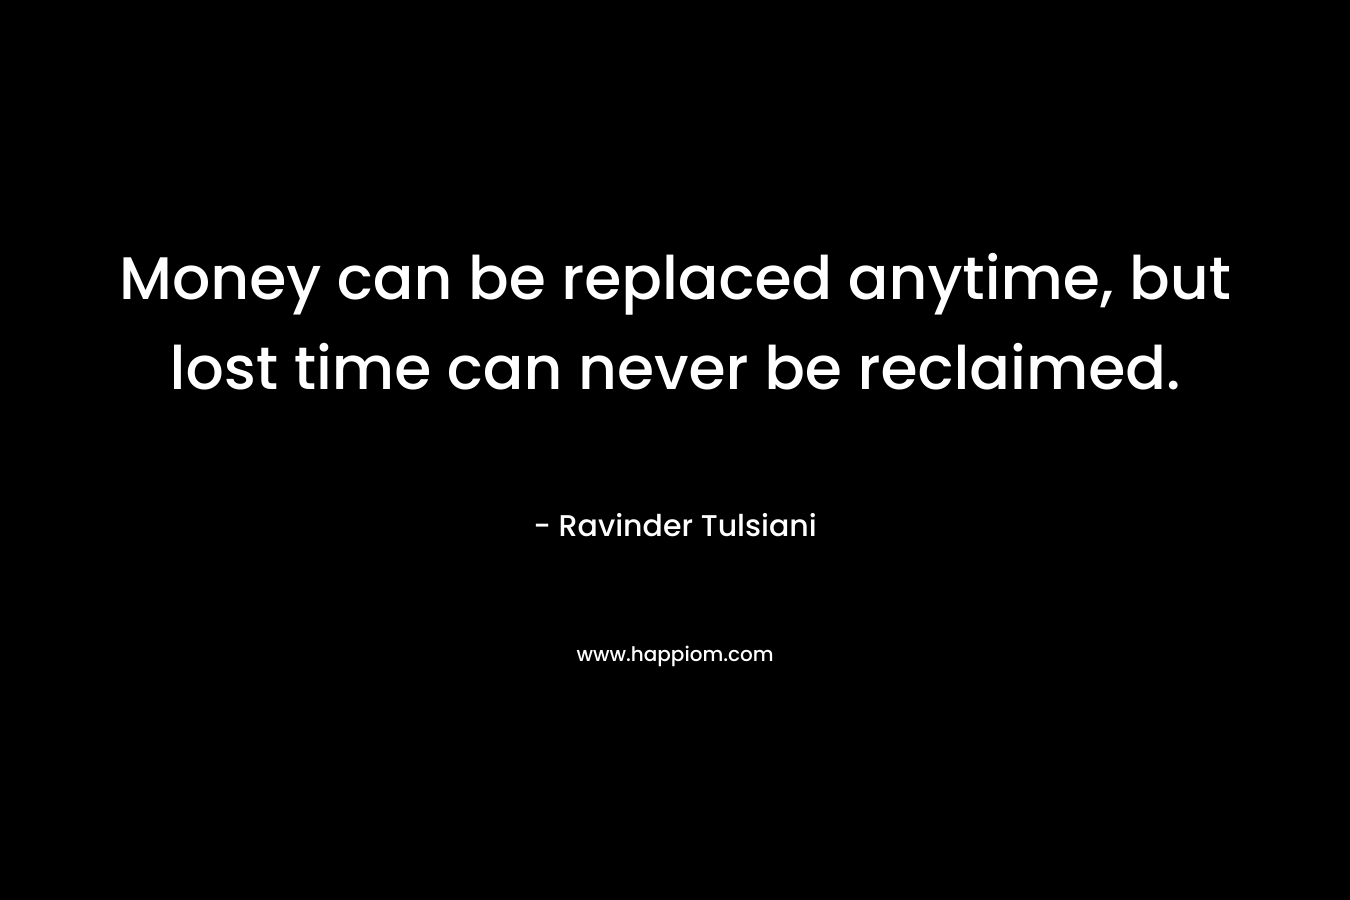 Money can be replaced anytime, but lost time can never be reclaimed.